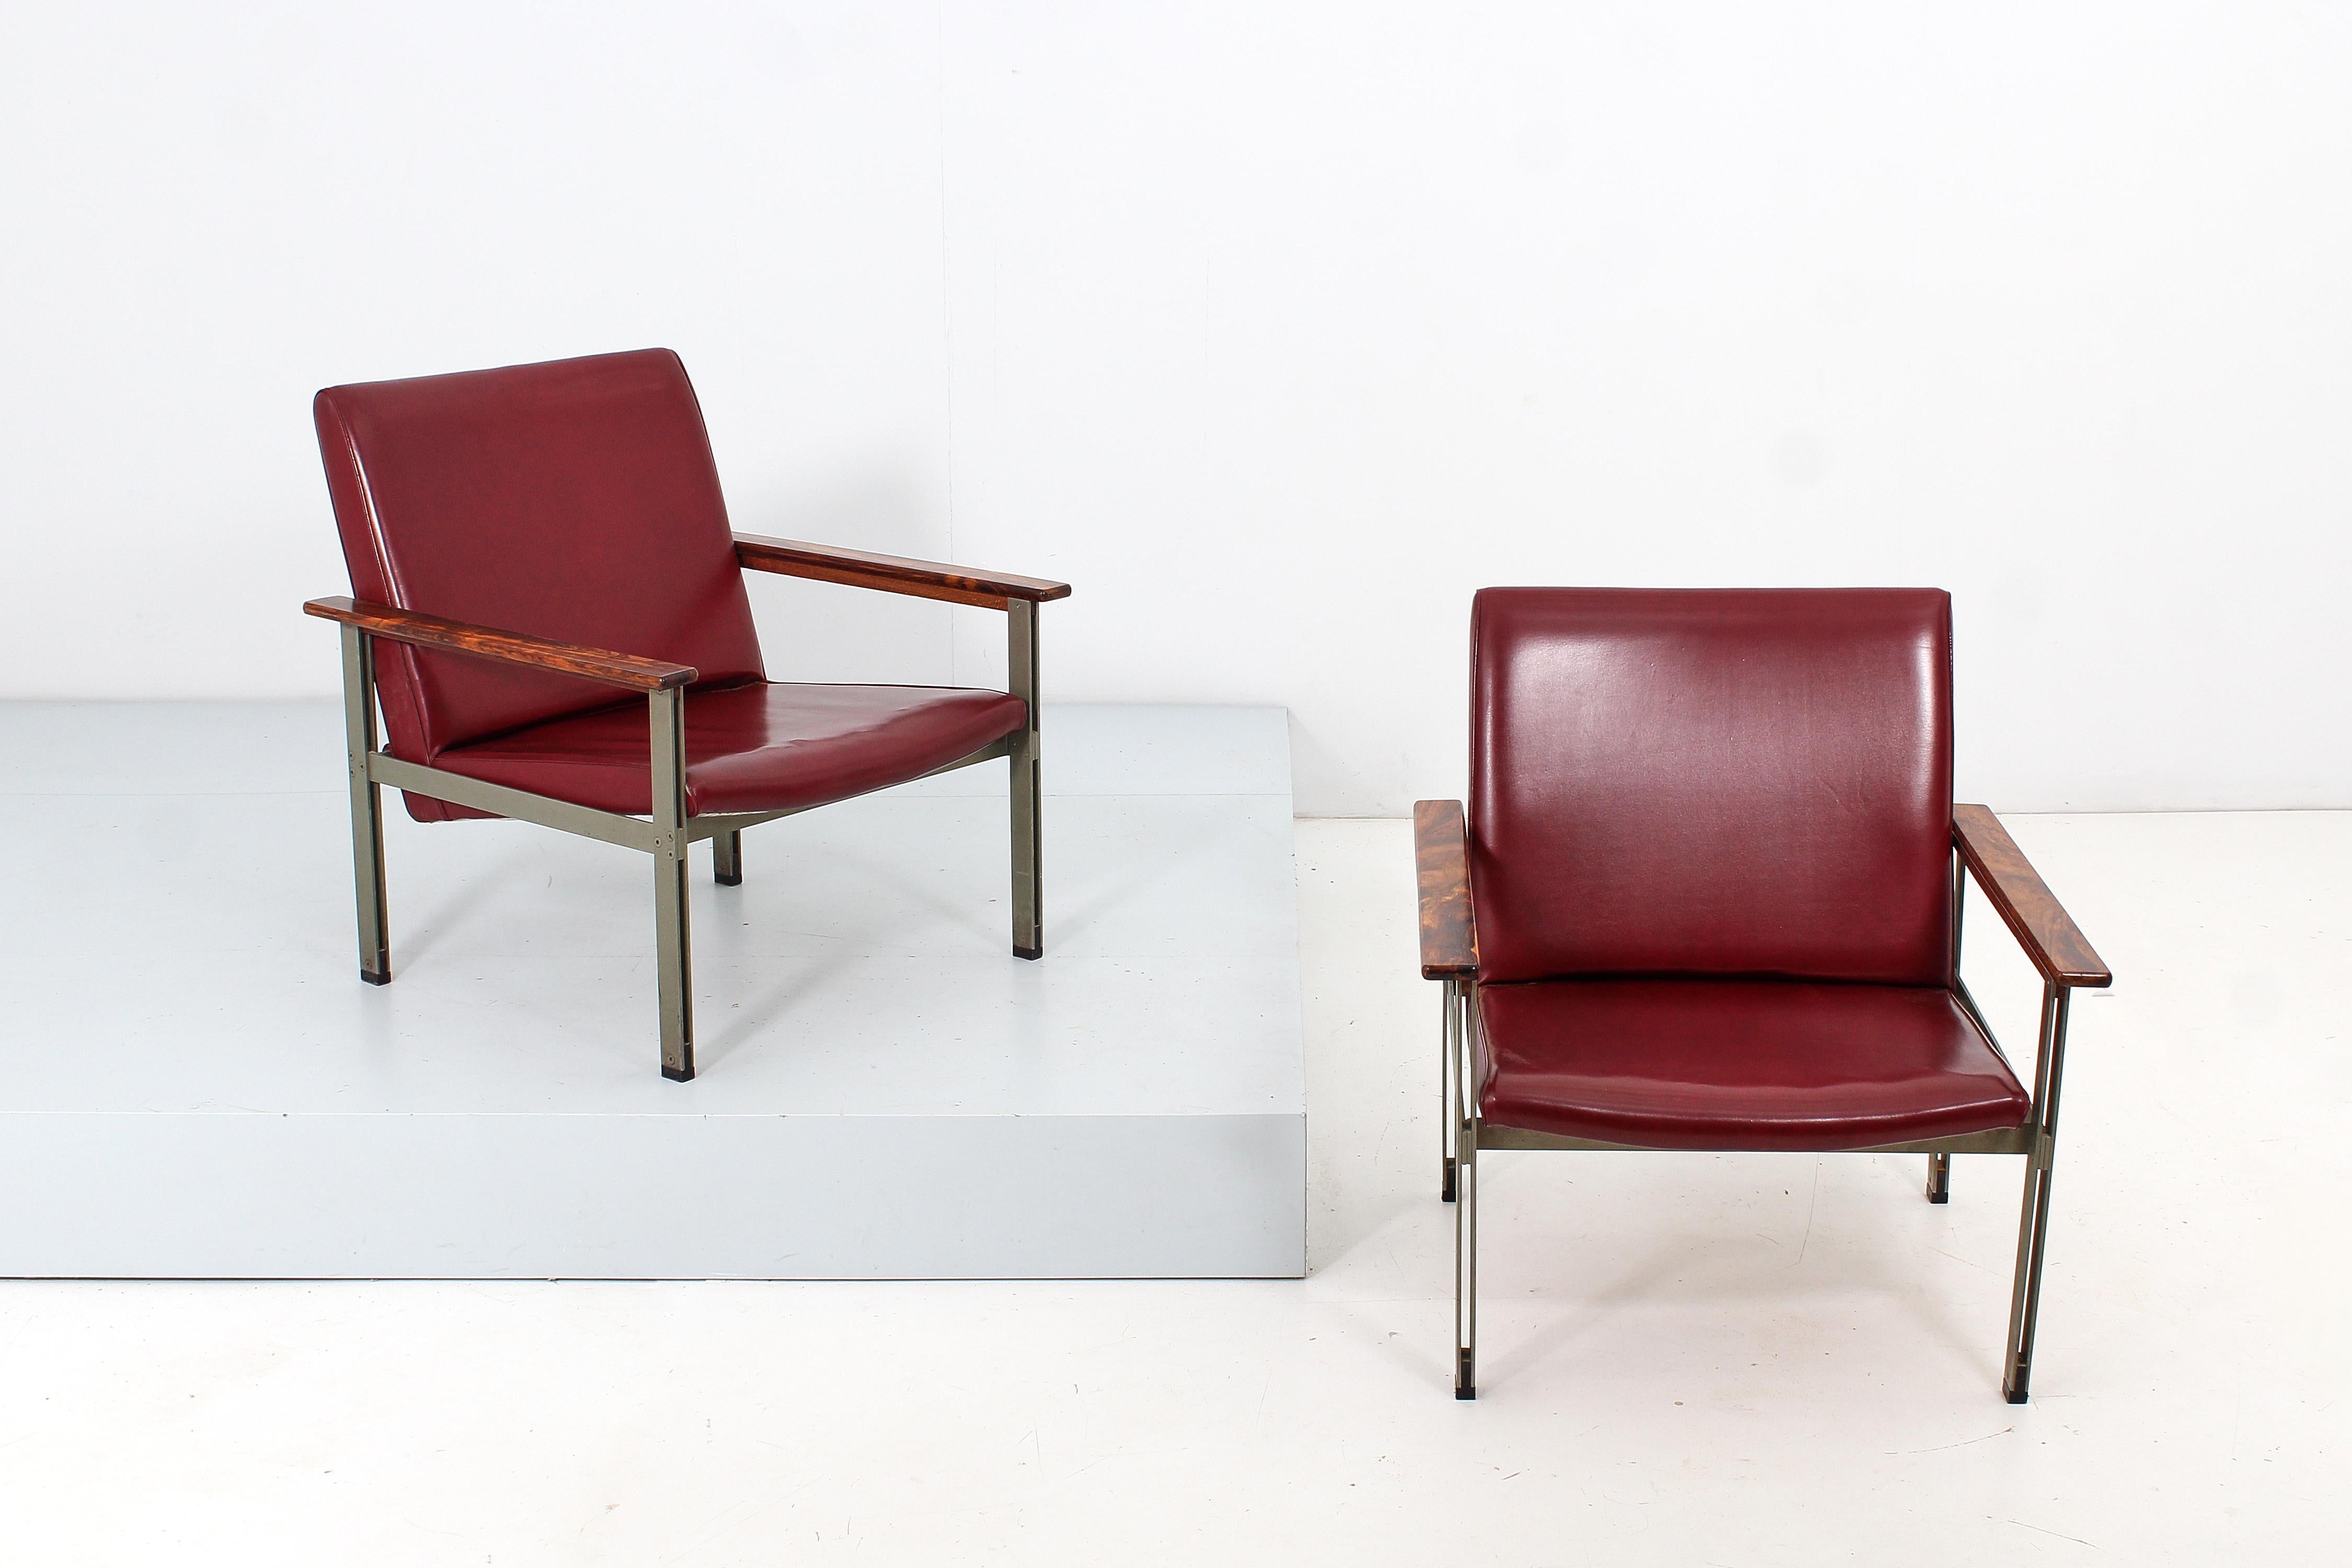 Pair of geometric armchairs in red skai, satin metal with teak elements. Attributable to George Coslin for 3V Arredamenti Padova, 1970s. Present the factory label.
Wear consistent with age and use.

